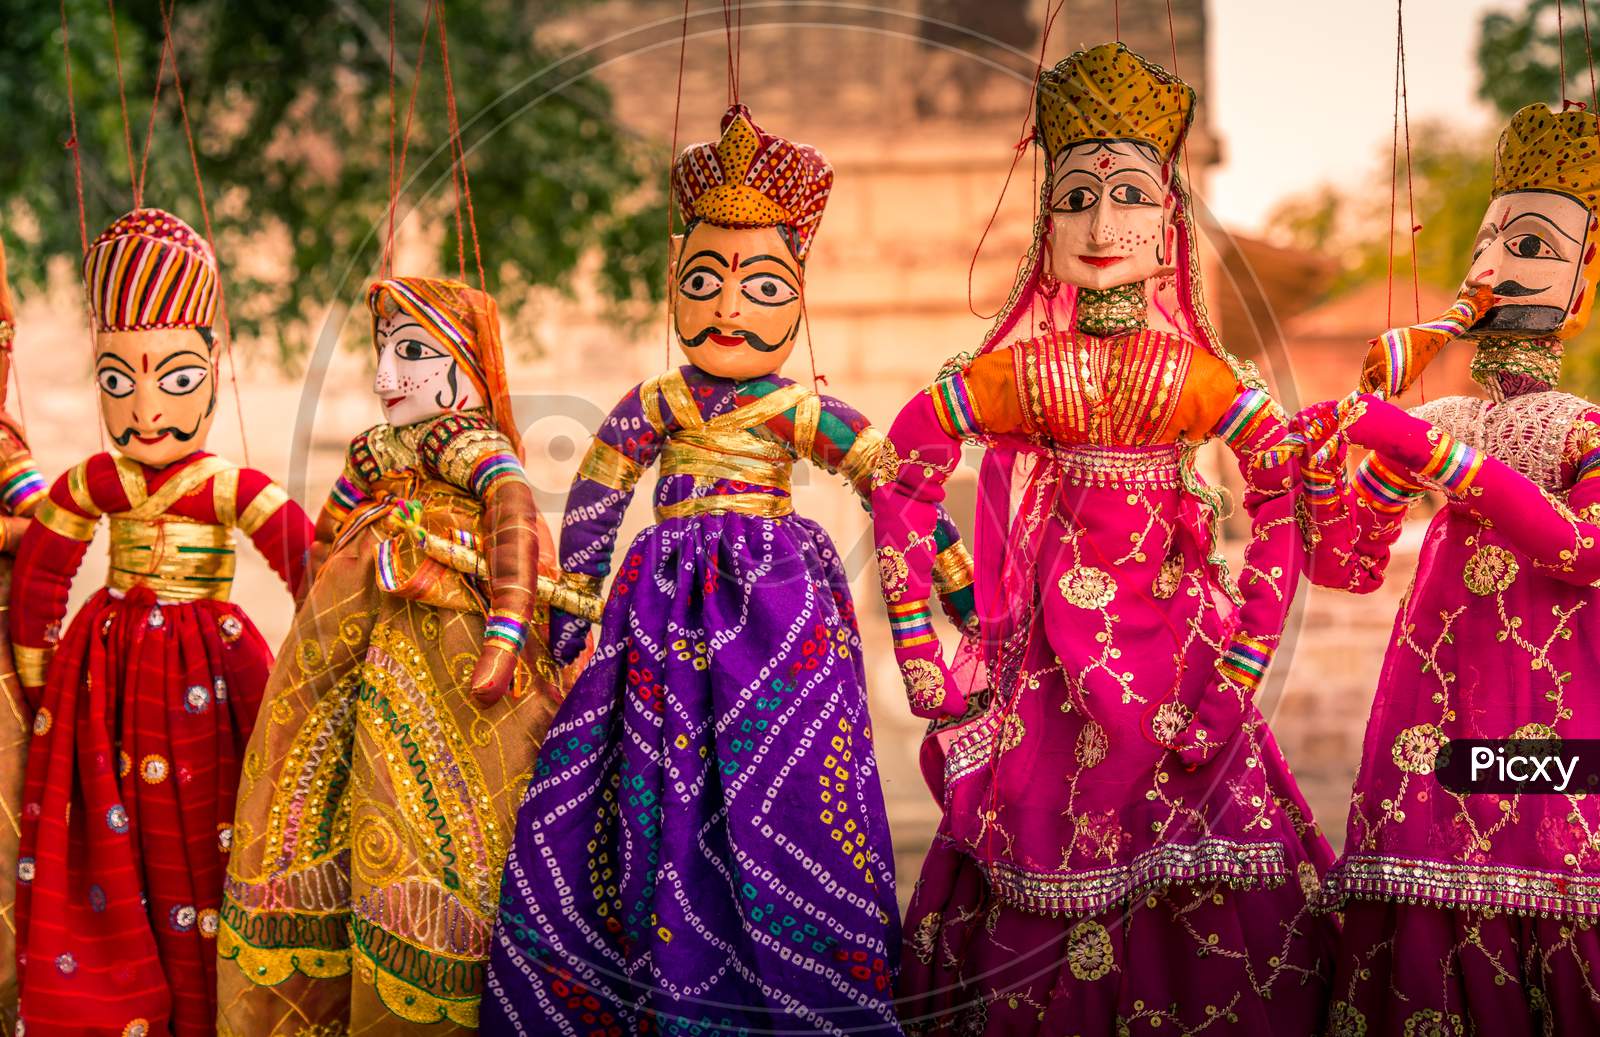 Handicraft Rajasthani Puppets Toys Displayed For Sale In Jodhpur